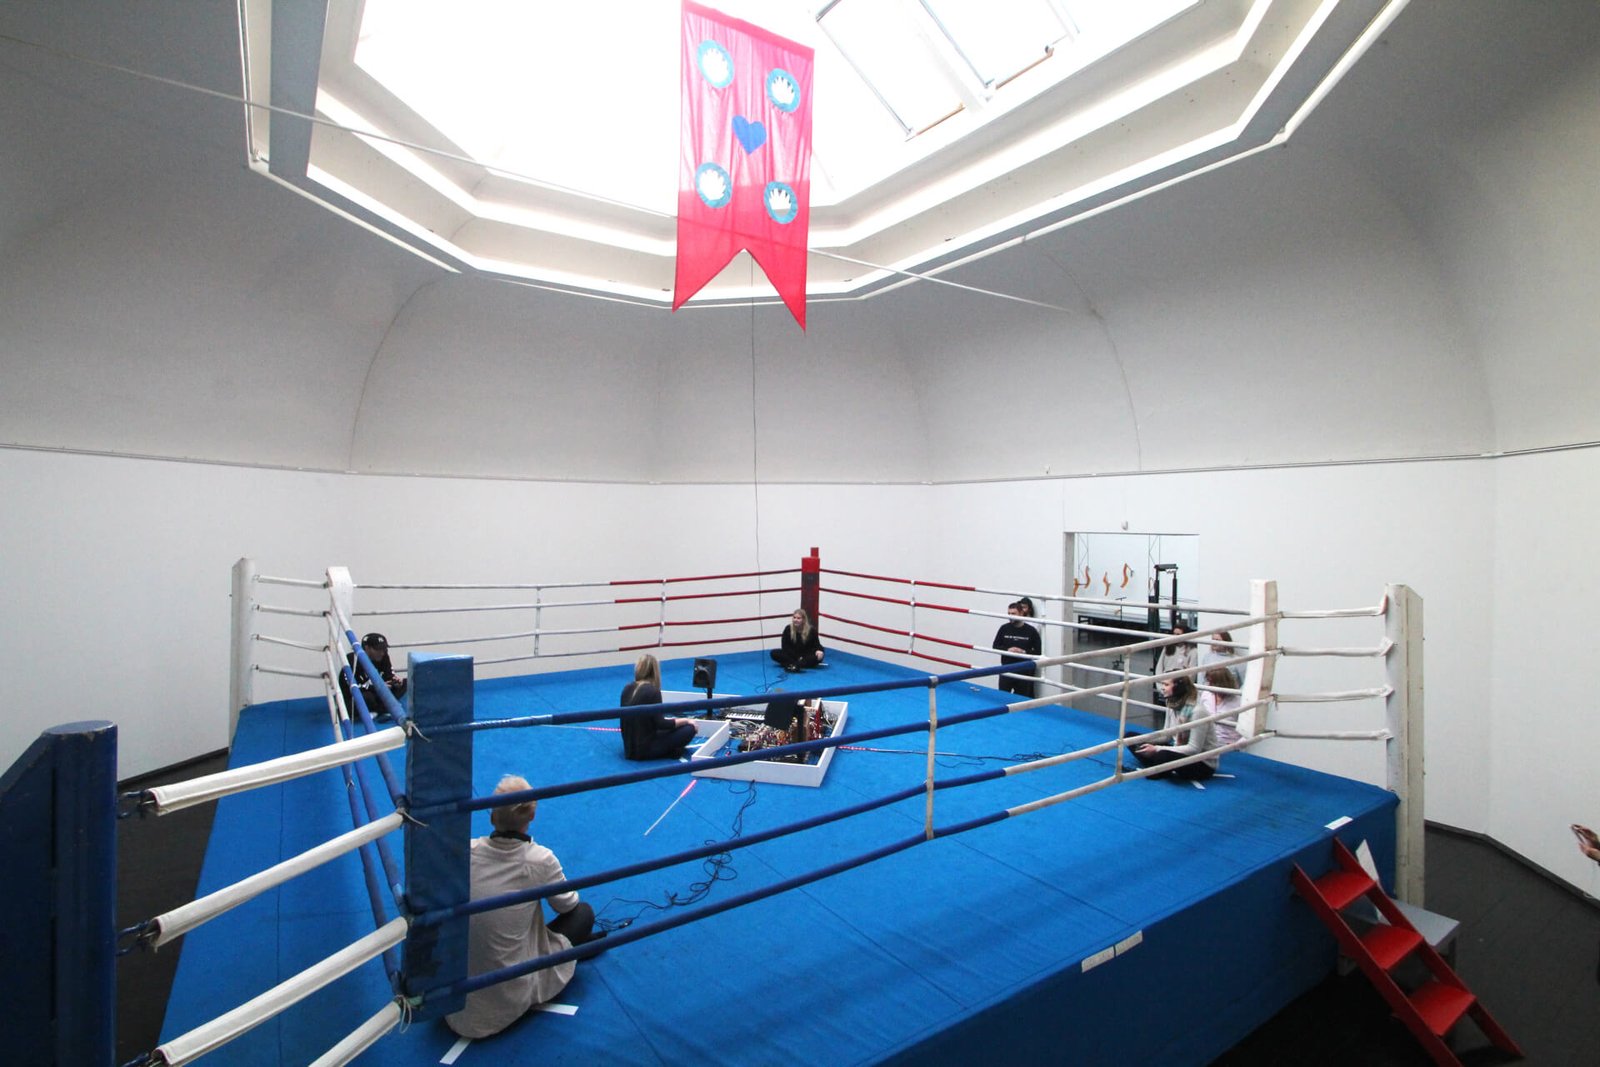 A person in each of a boxing ring's 4 corner's holding a controller that is connected to a instruments in the center where a 5th player's heartbeat drives the music.